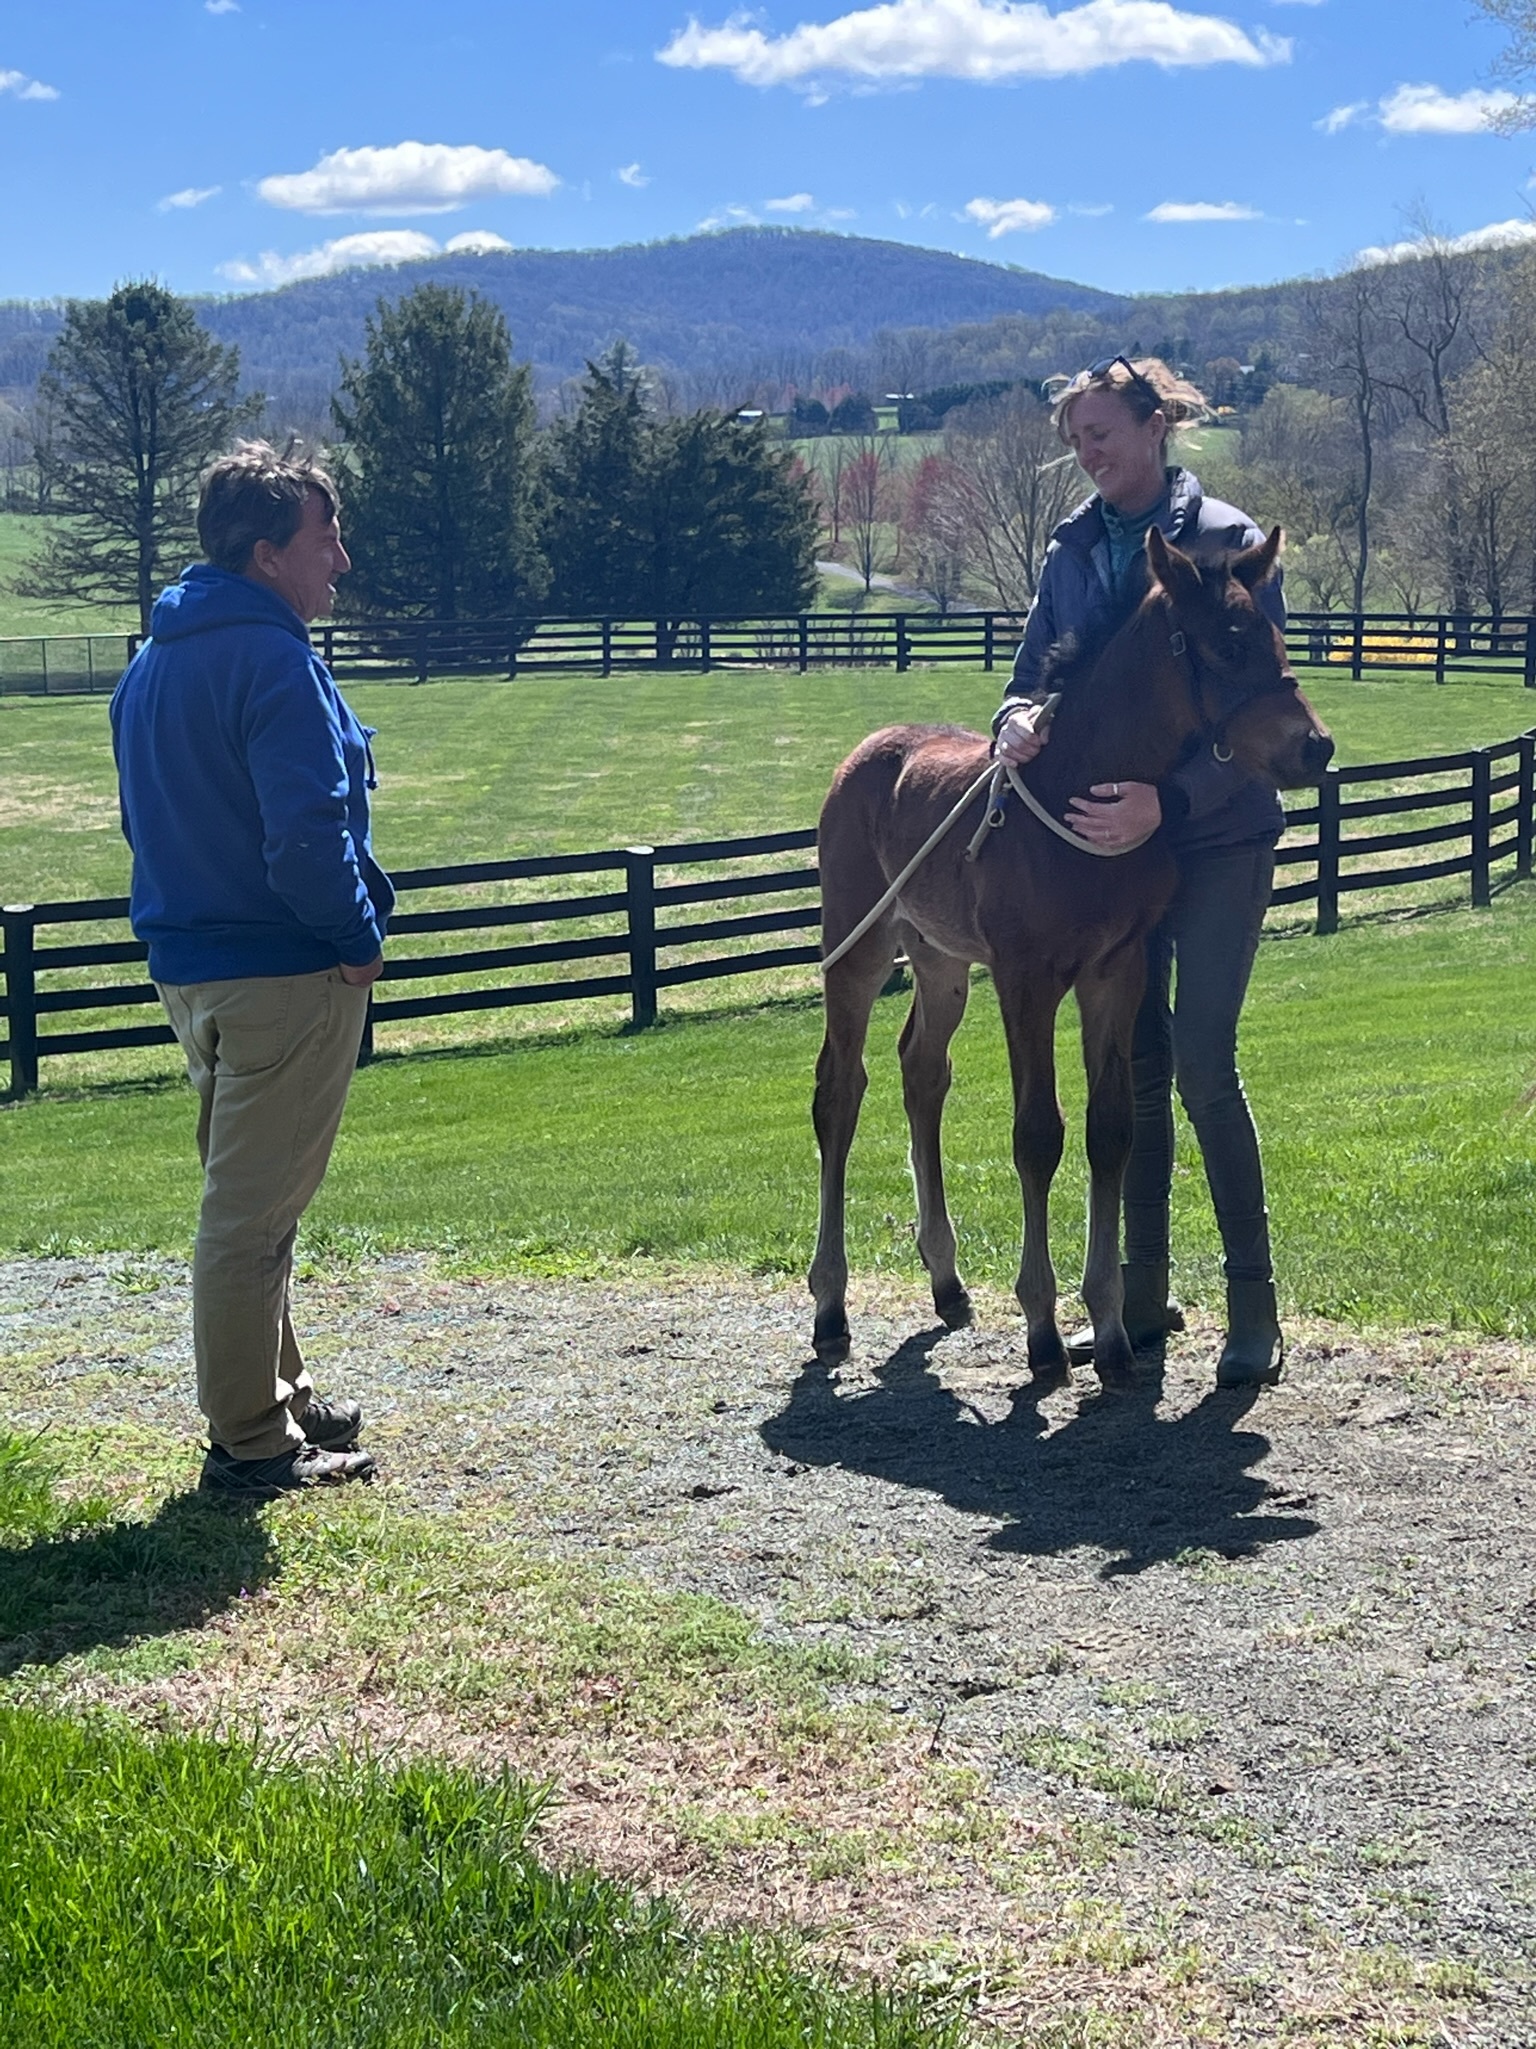 David O'Connor's (left) interest in natural horsemanship has given Landmark homebreds a strong start on the ground. Photo courtesy of Lauren Nicholson